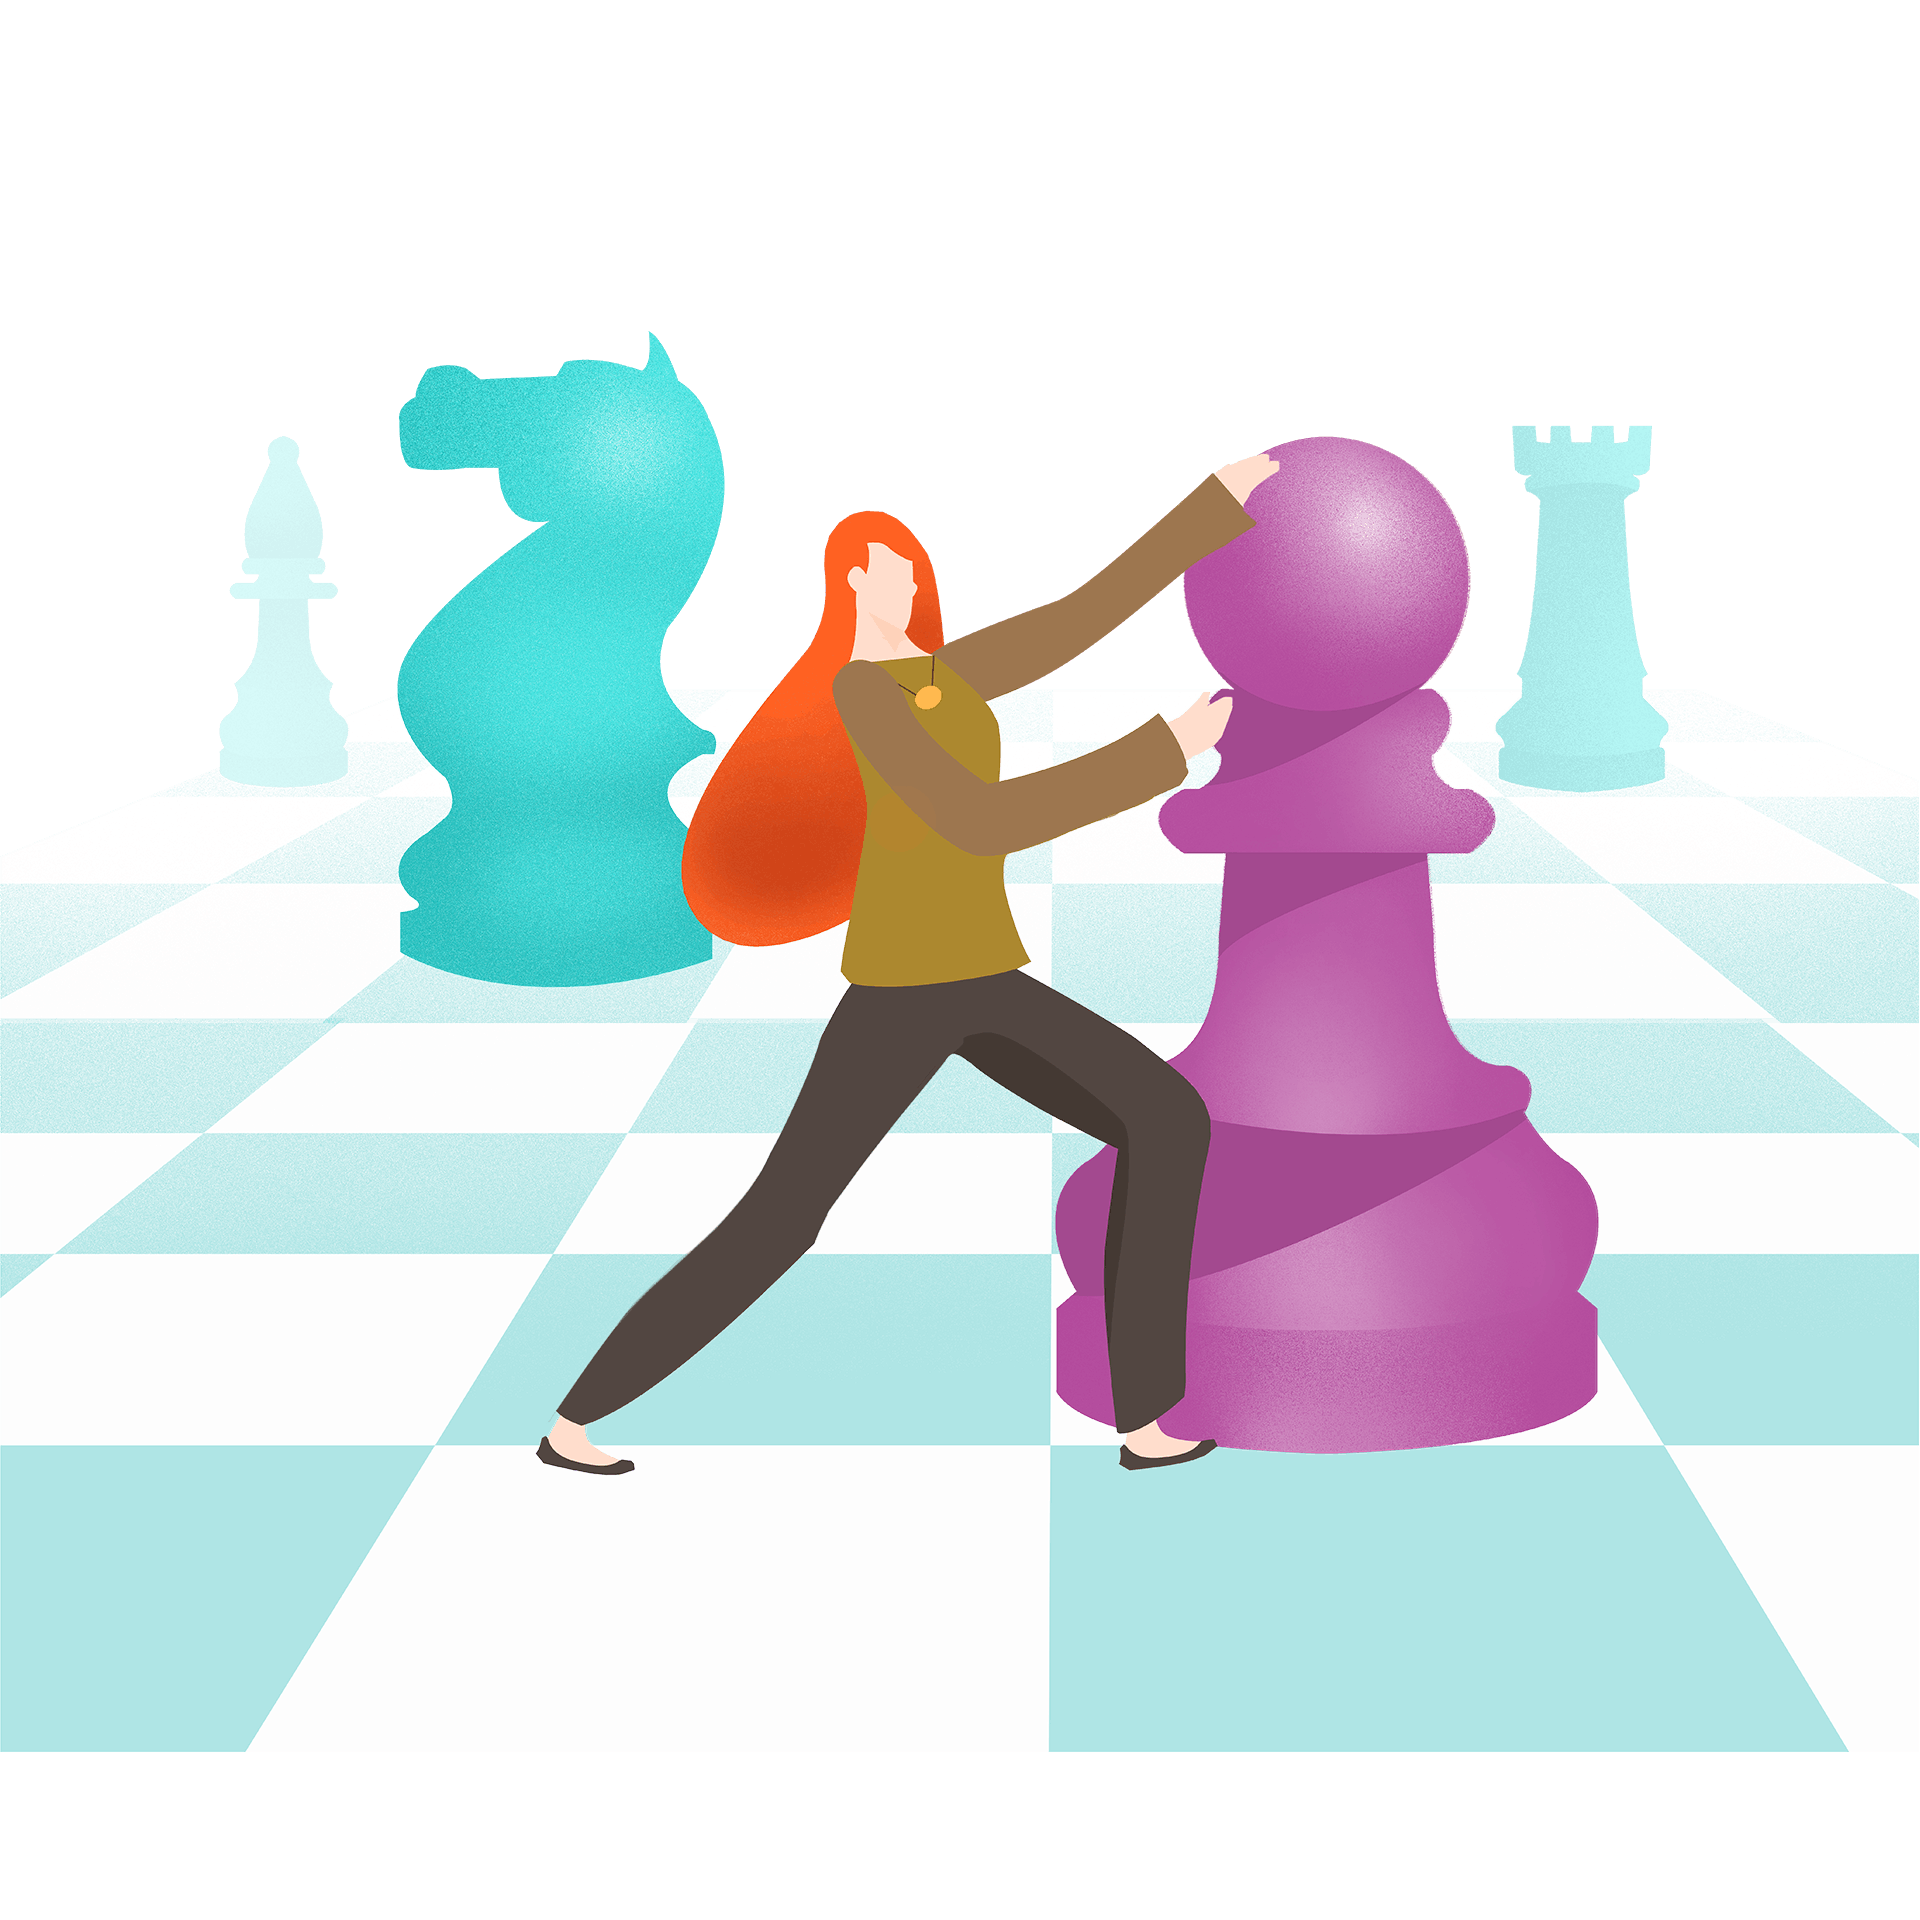 An illustration of a person moving giant chess pieces